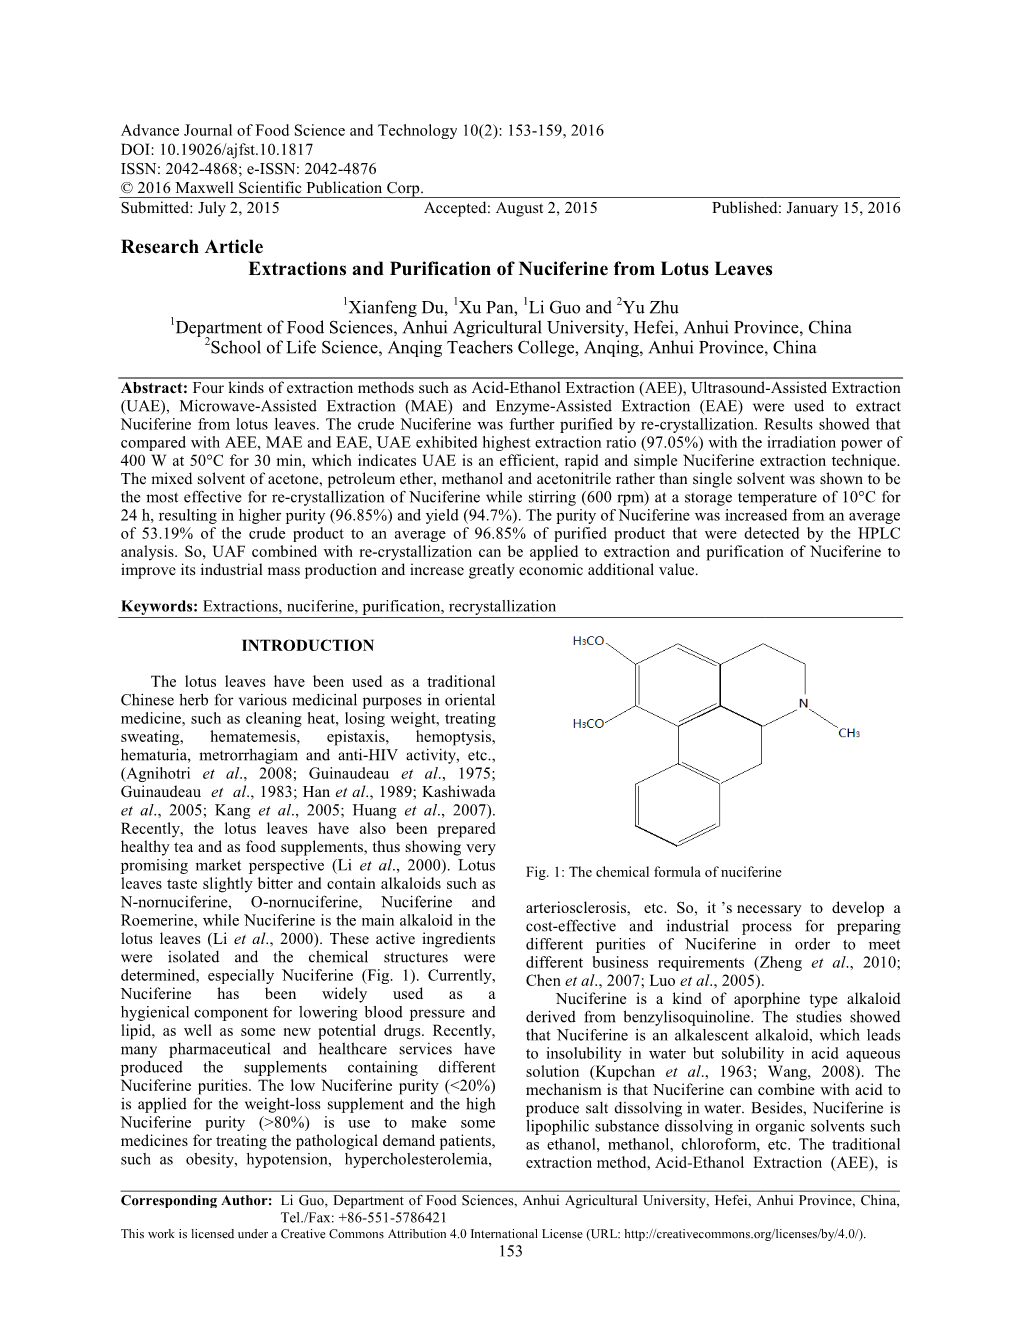 Research Article Extractions and Purification Actions and Purification